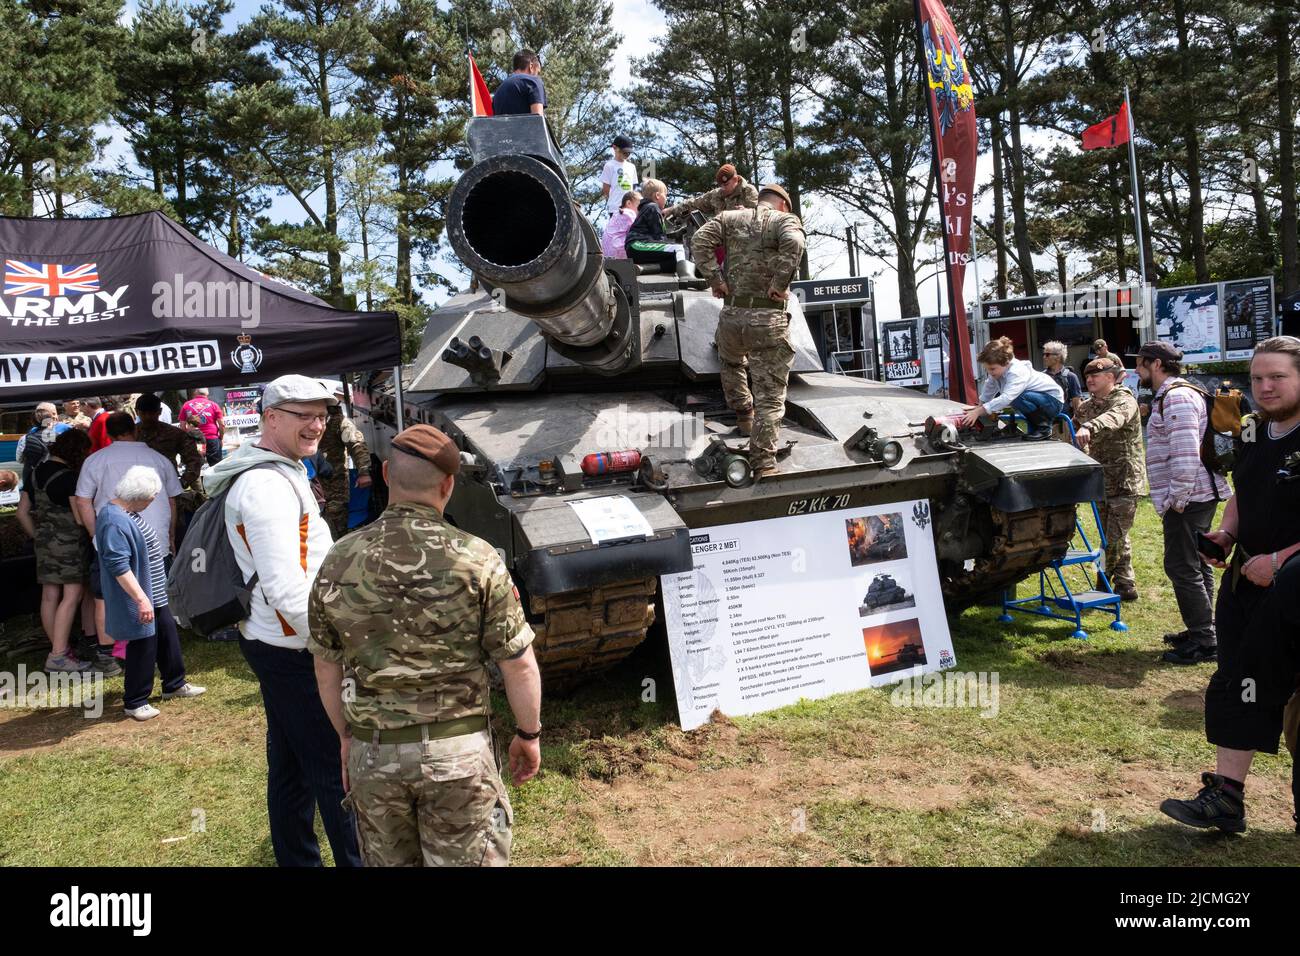 Massive Chieftain tank as part of the Army display at the Royal Cornwall show. Climbed all over by children and adults. Soldiers keeping people safe. Stock Photo